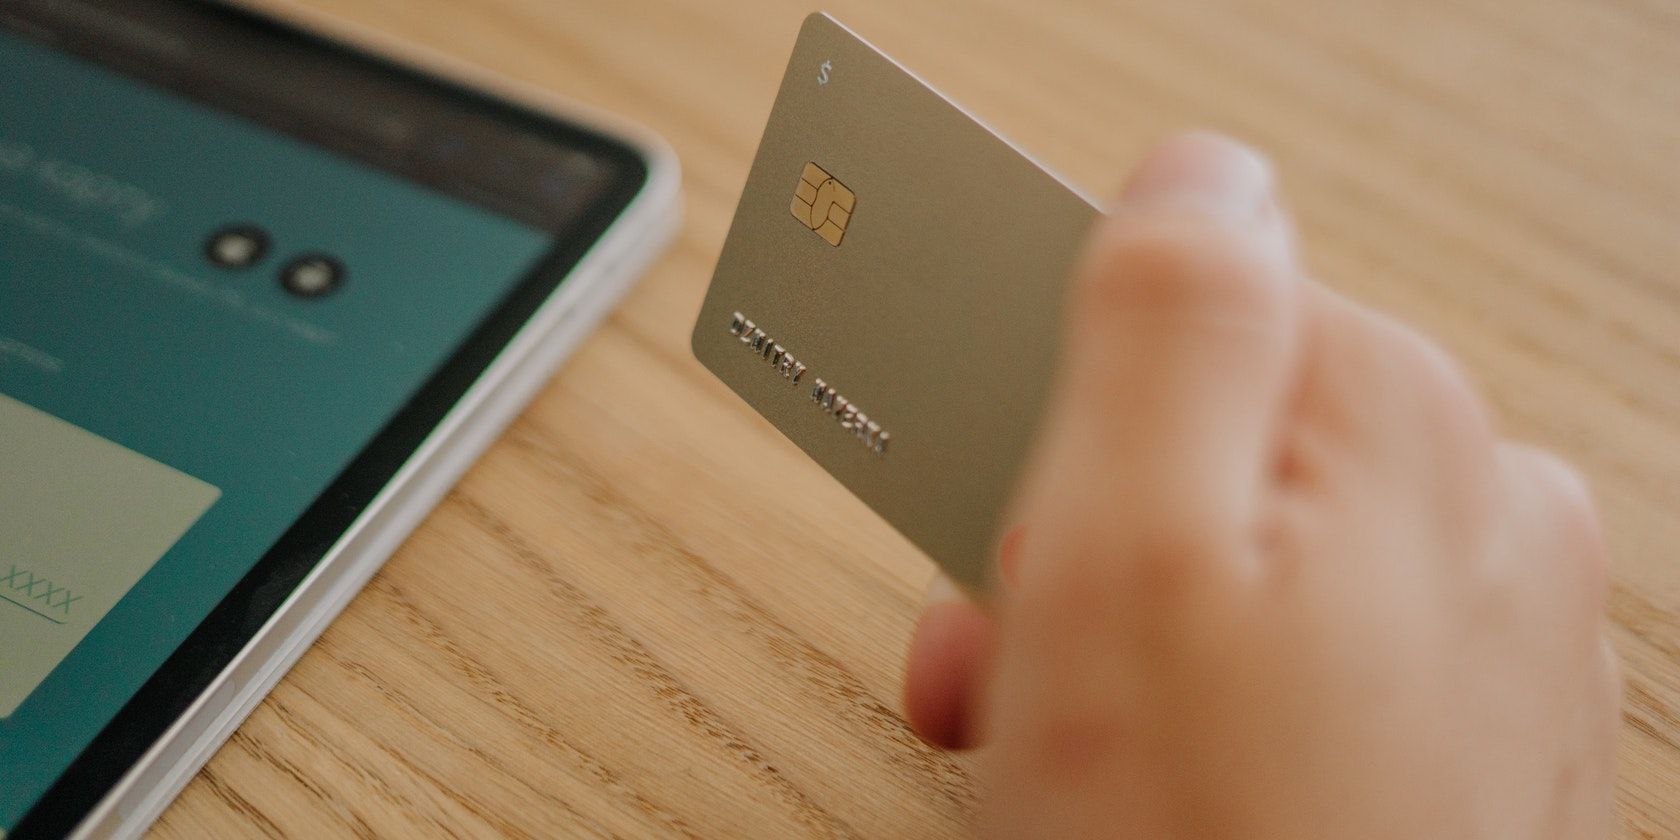 Stock image photo of a hand holding a gold credit card